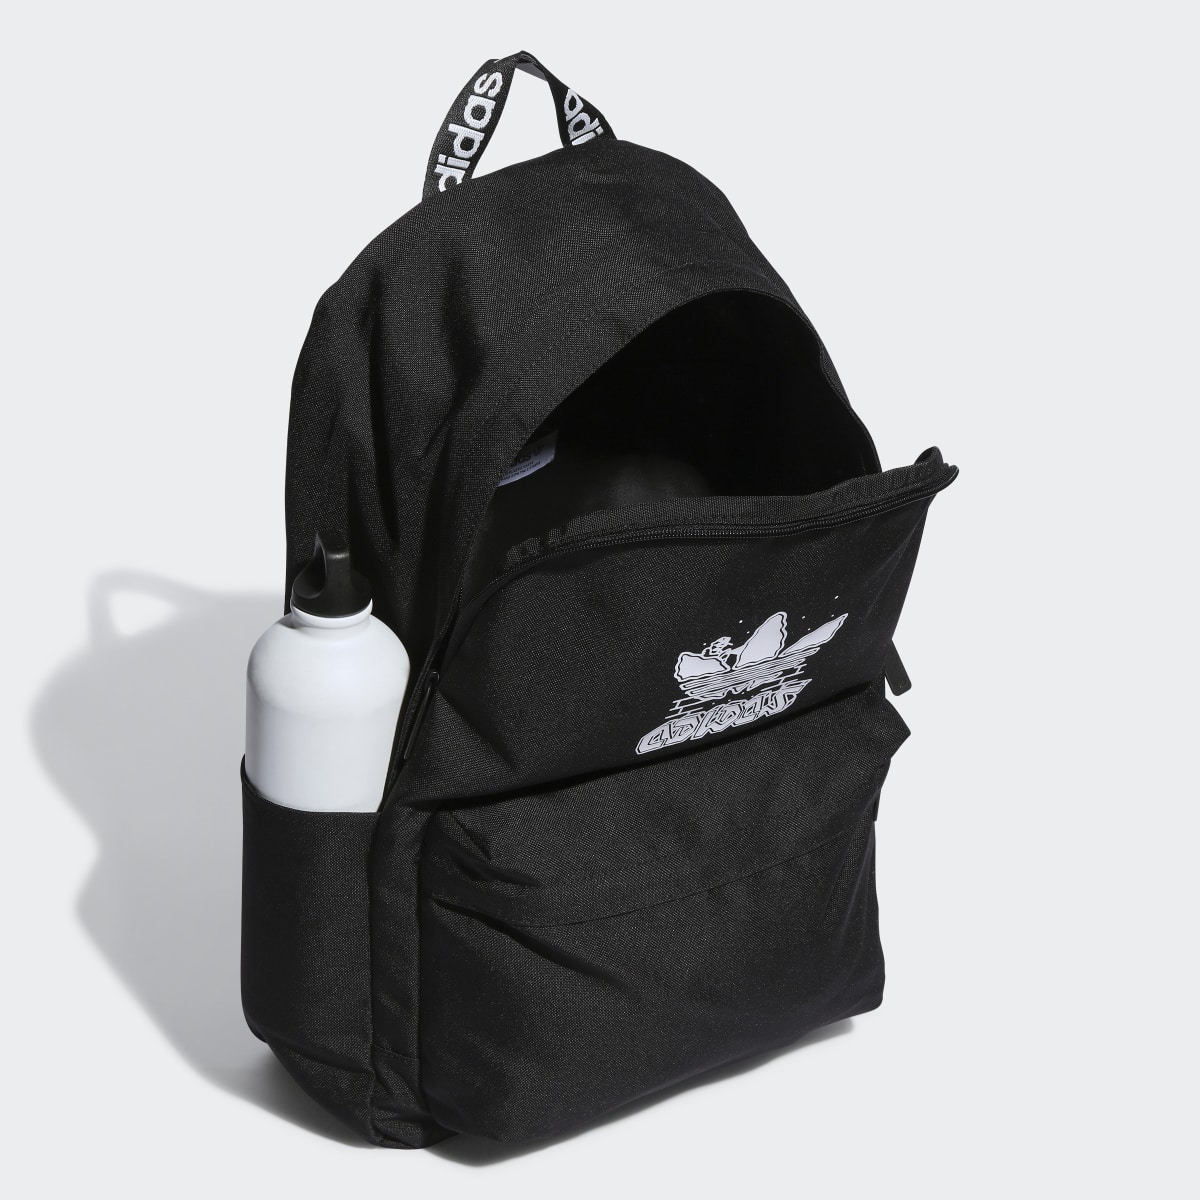 Adidas Trefoil Classic Backpack. 5